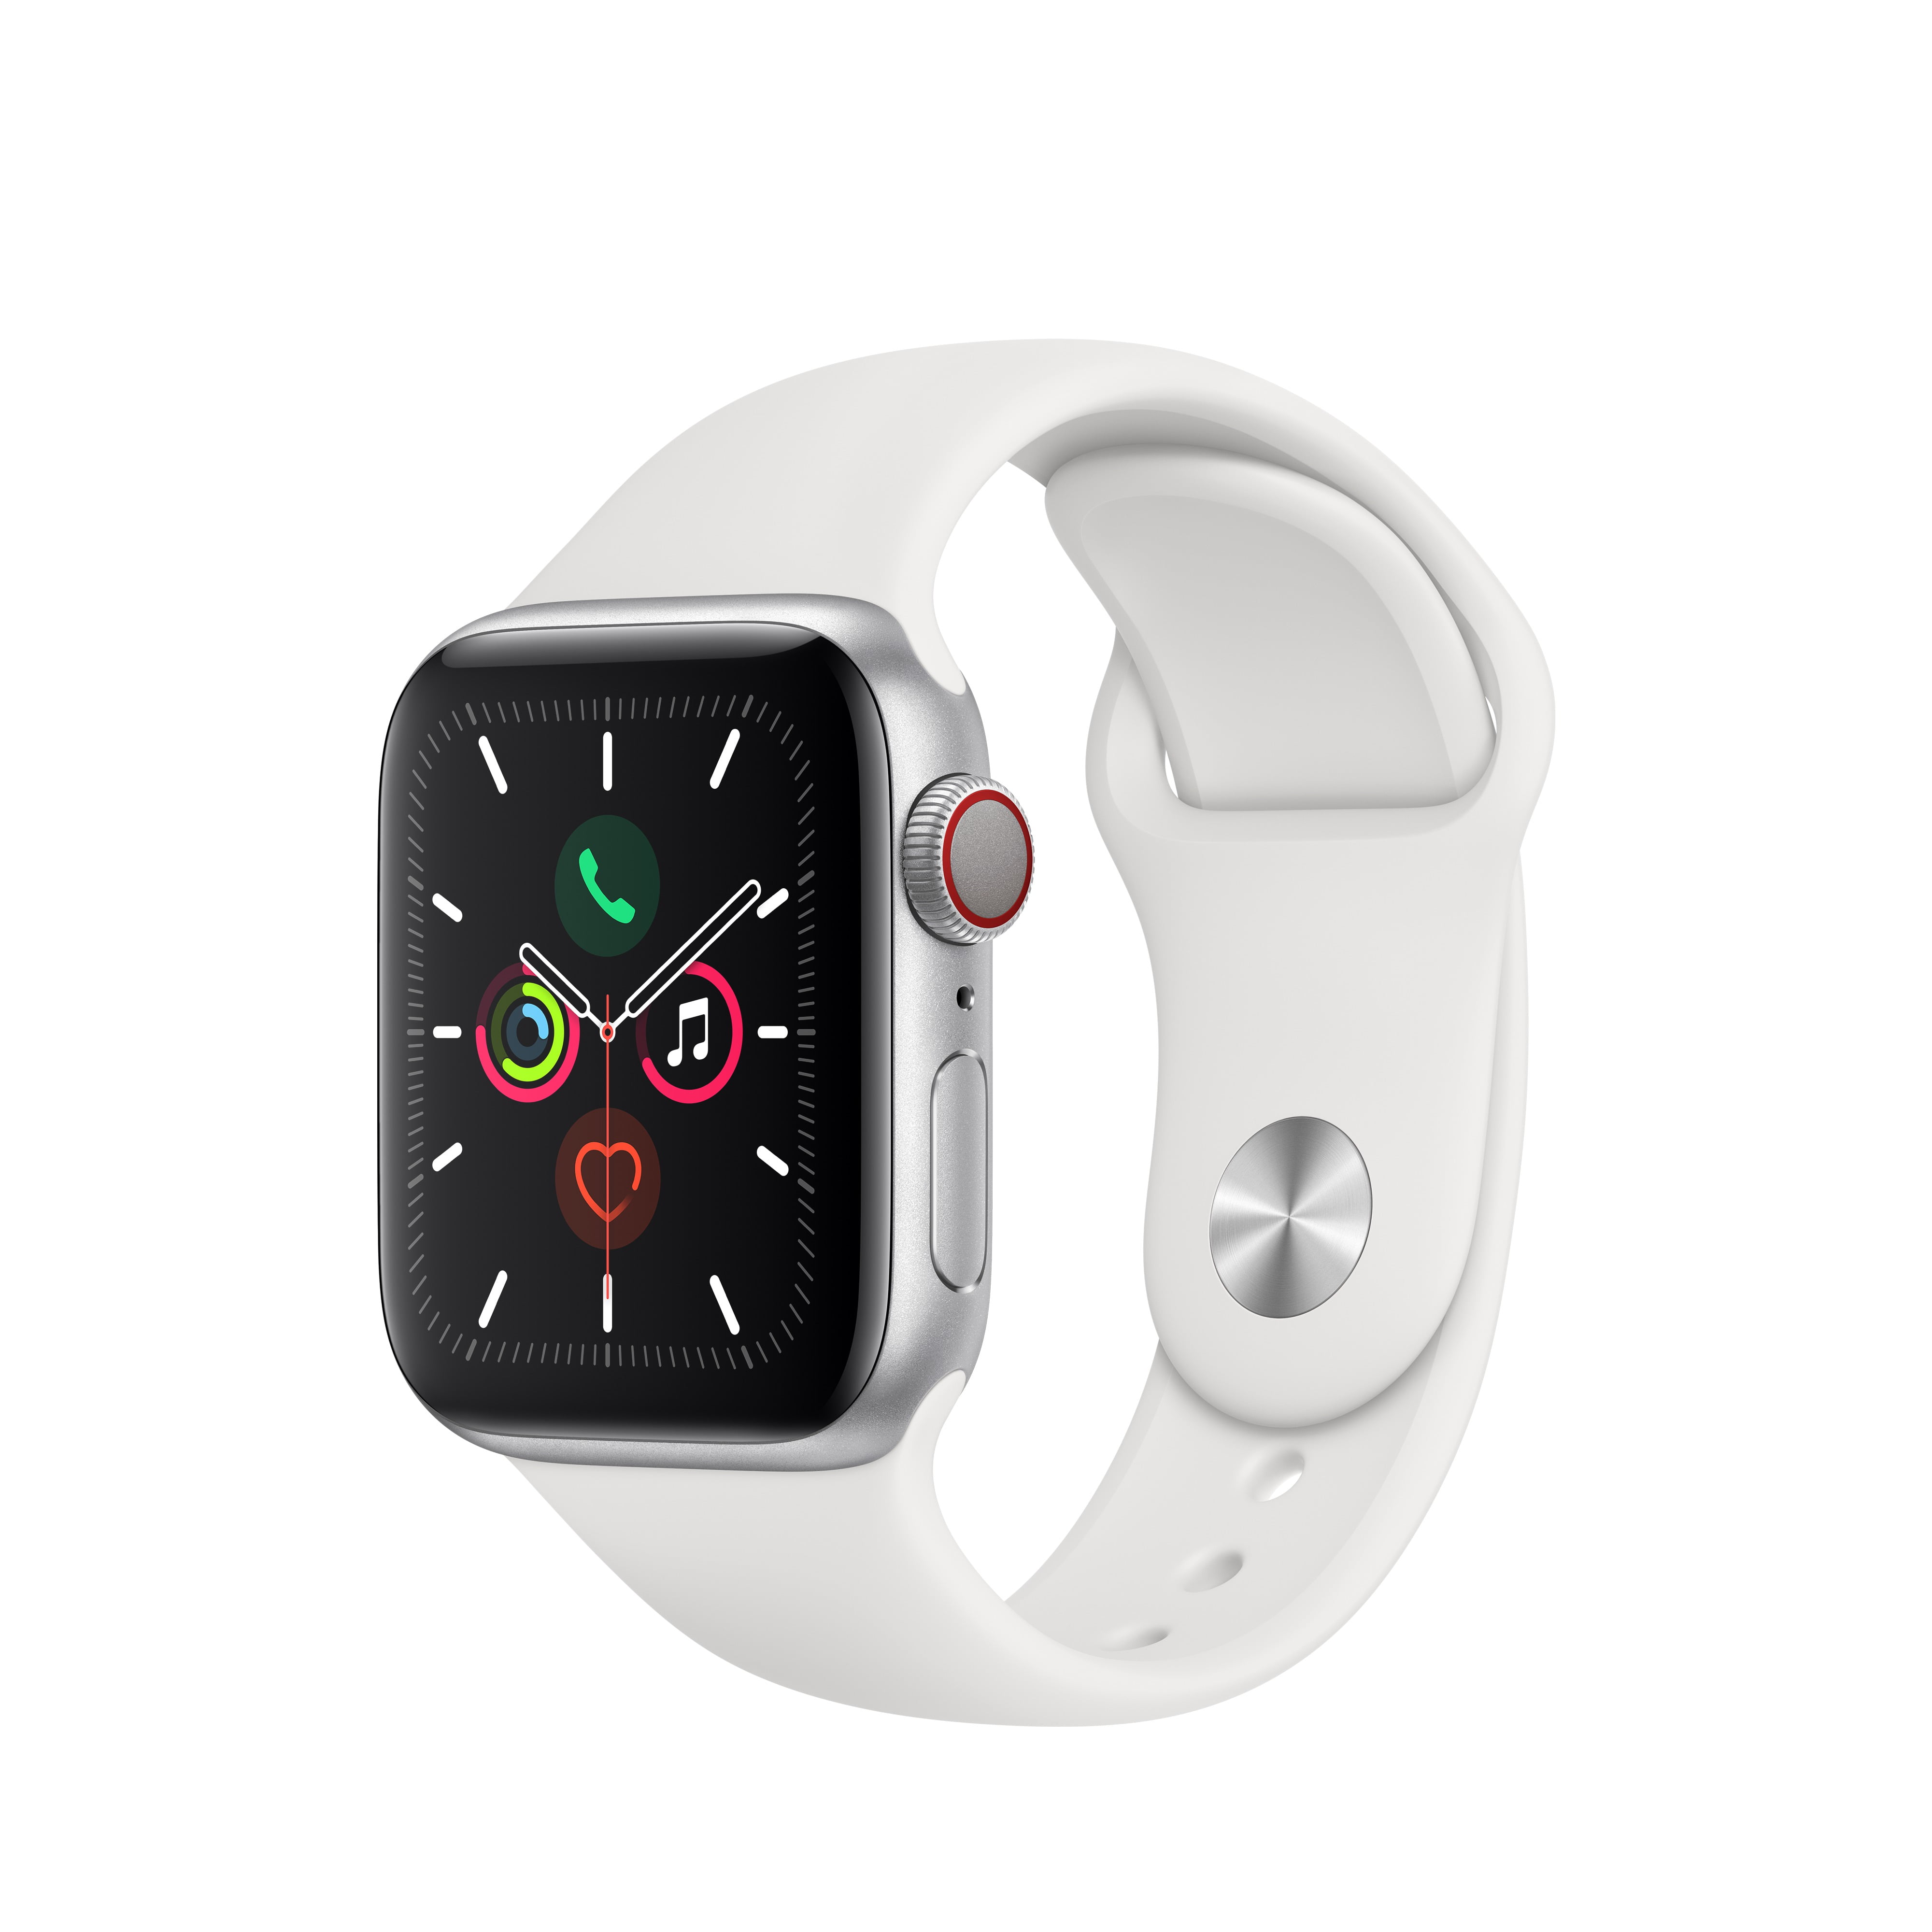 Apple Watch Series 5 GPS + Cellular, 40mm Space Gray Aluminum Case 